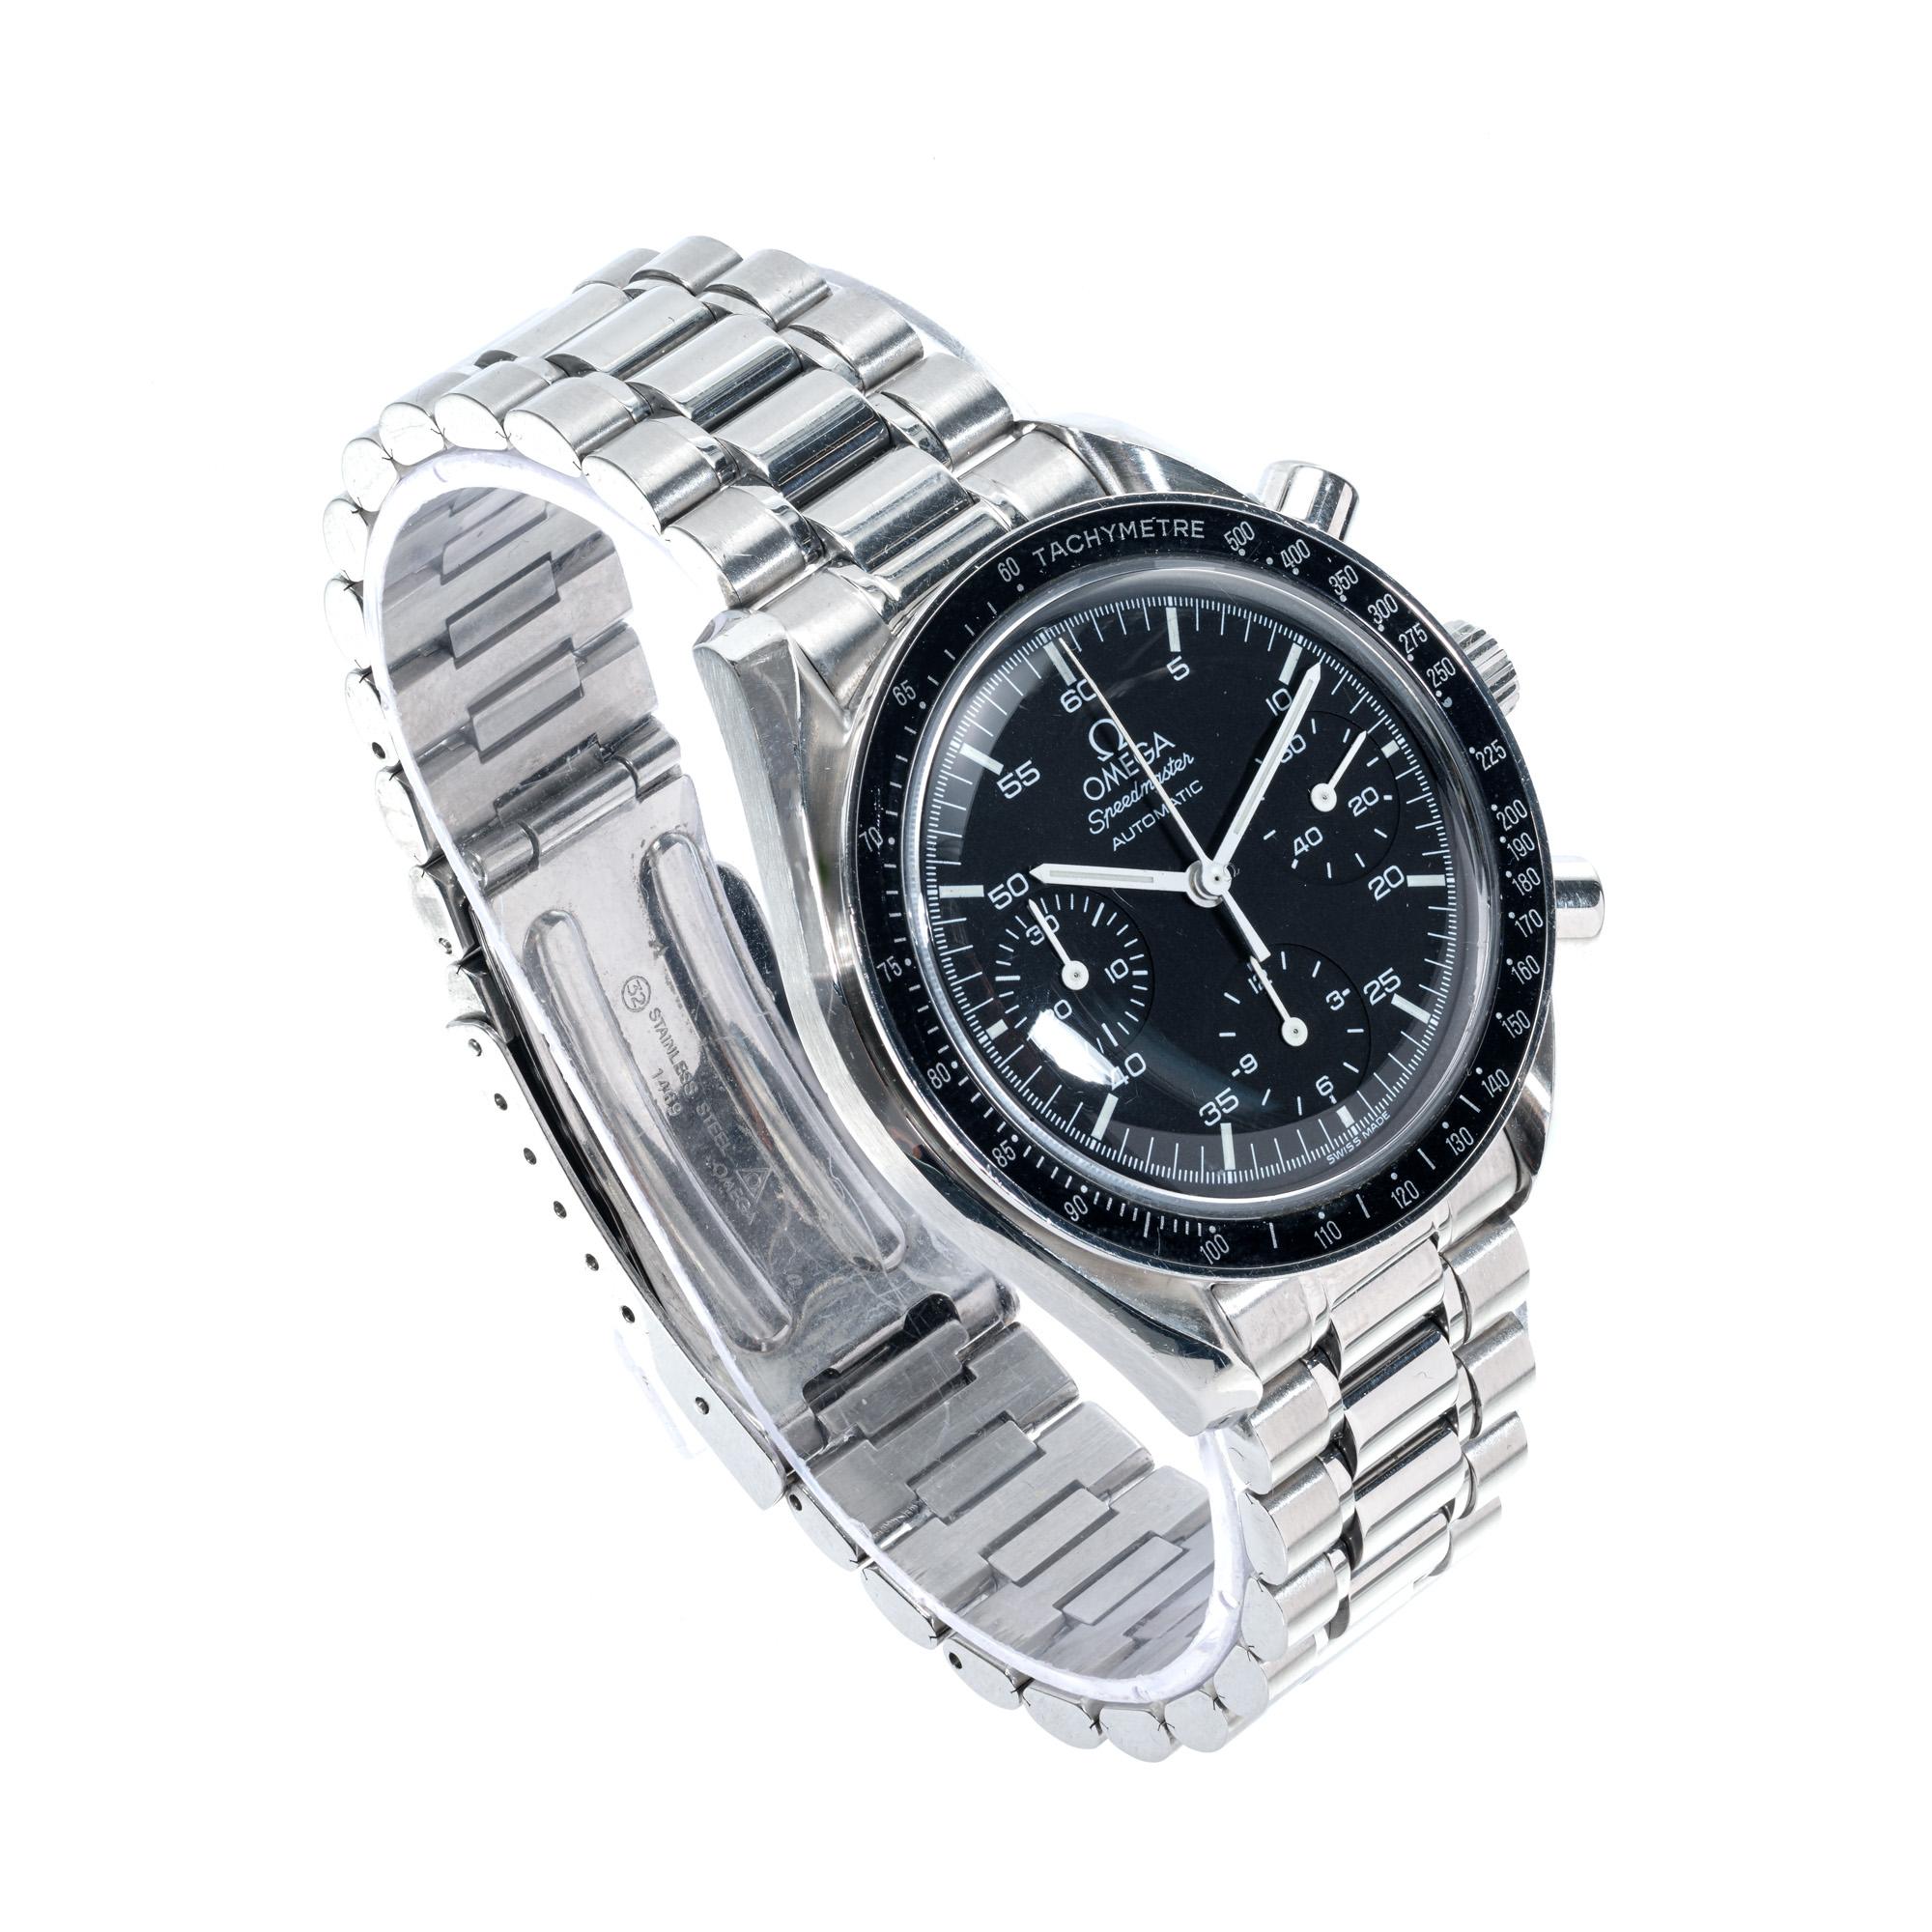 Omega Speedmaster Master Chronograph Men's Wristwatch In Good Condition For Sale In Stamford, CT